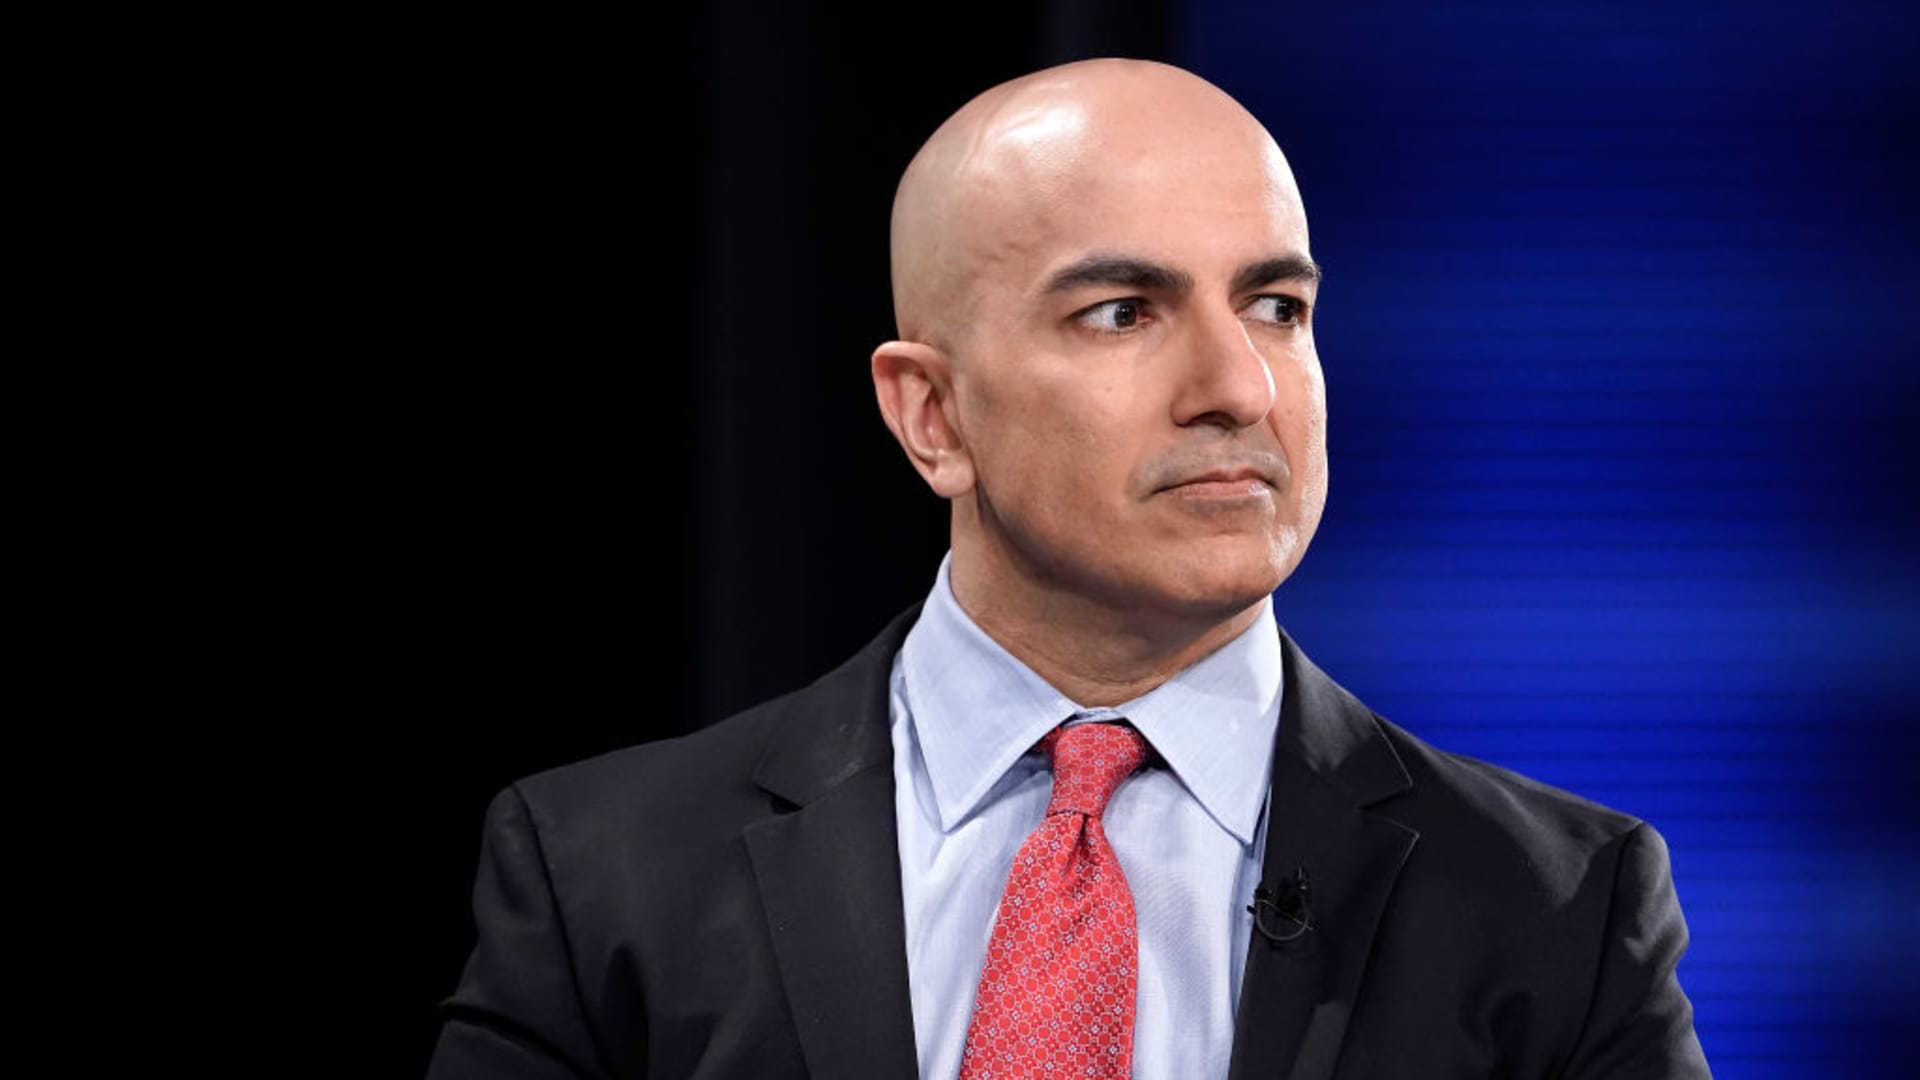 Fed’s Kashkari claims pressure in banking sector brings the U.S. closer to recession